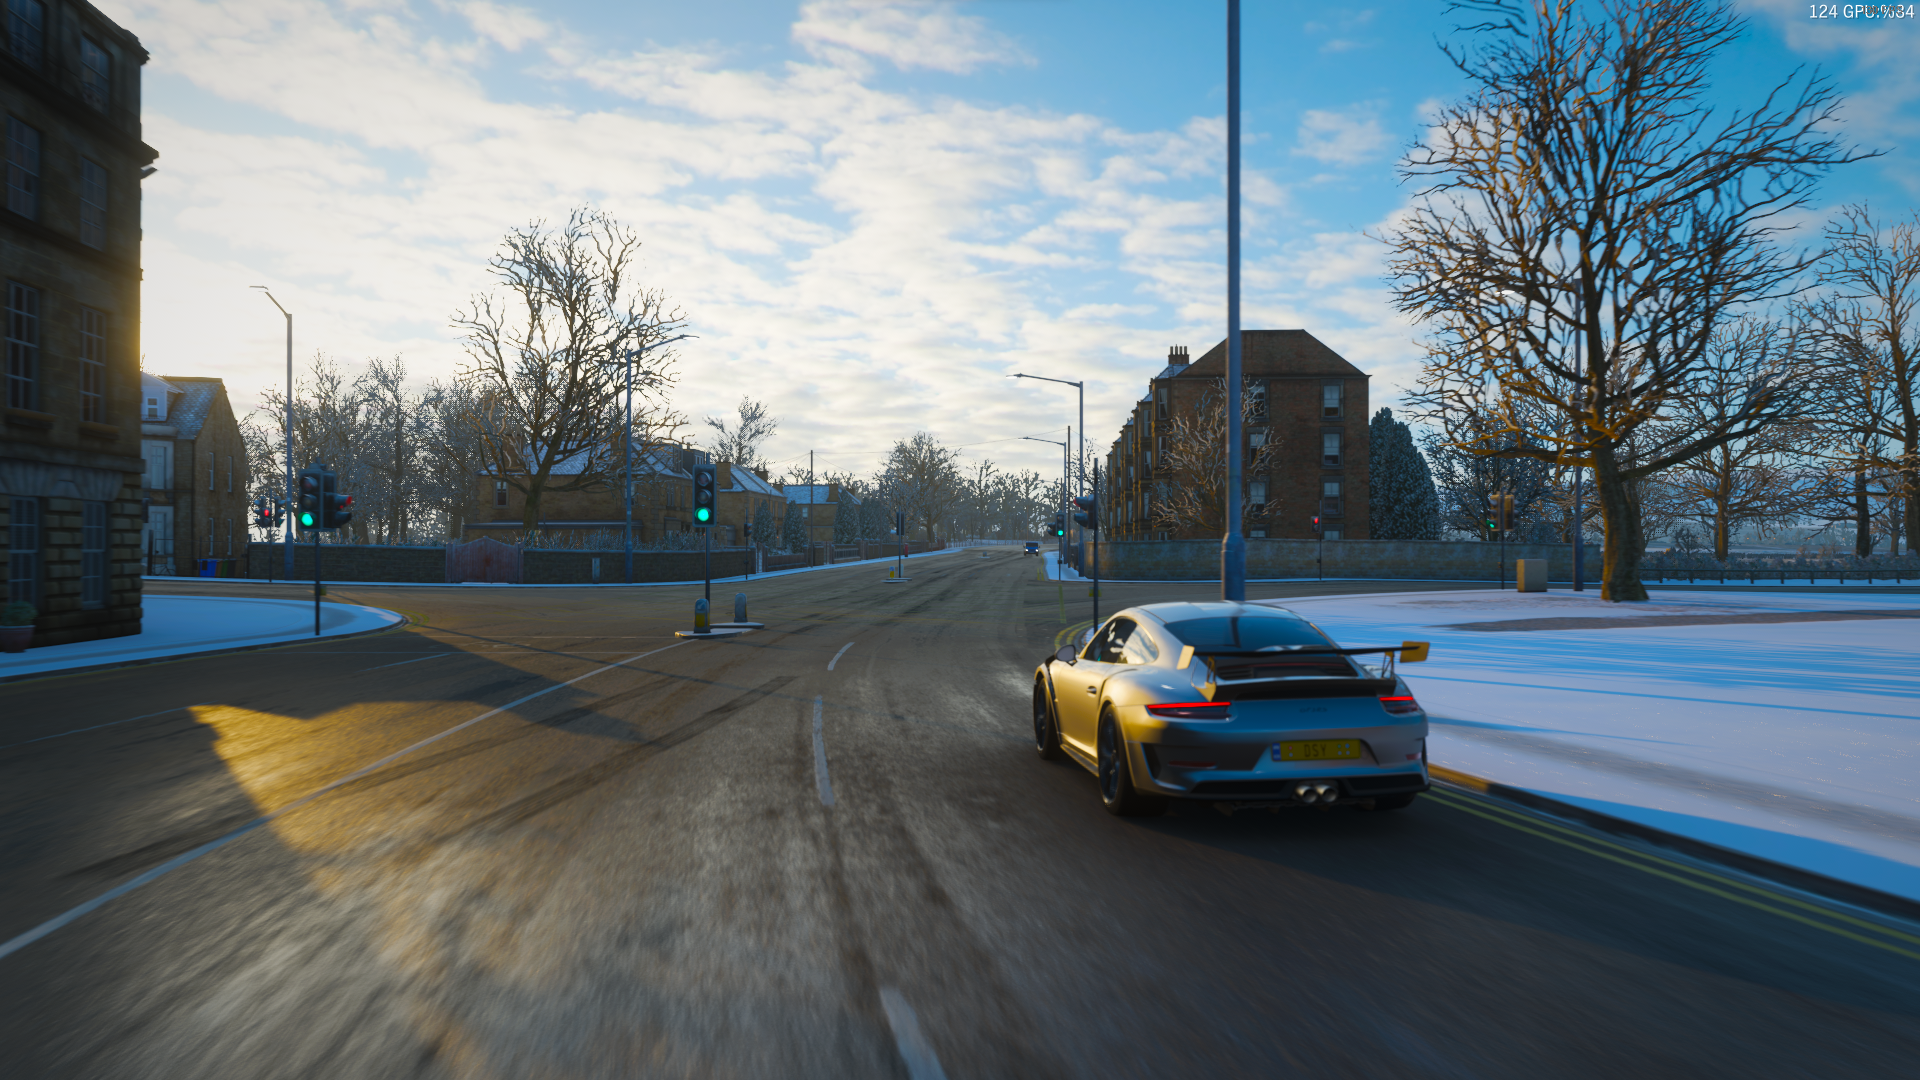 100+] Android Forza Horizon 4 Backgrounds